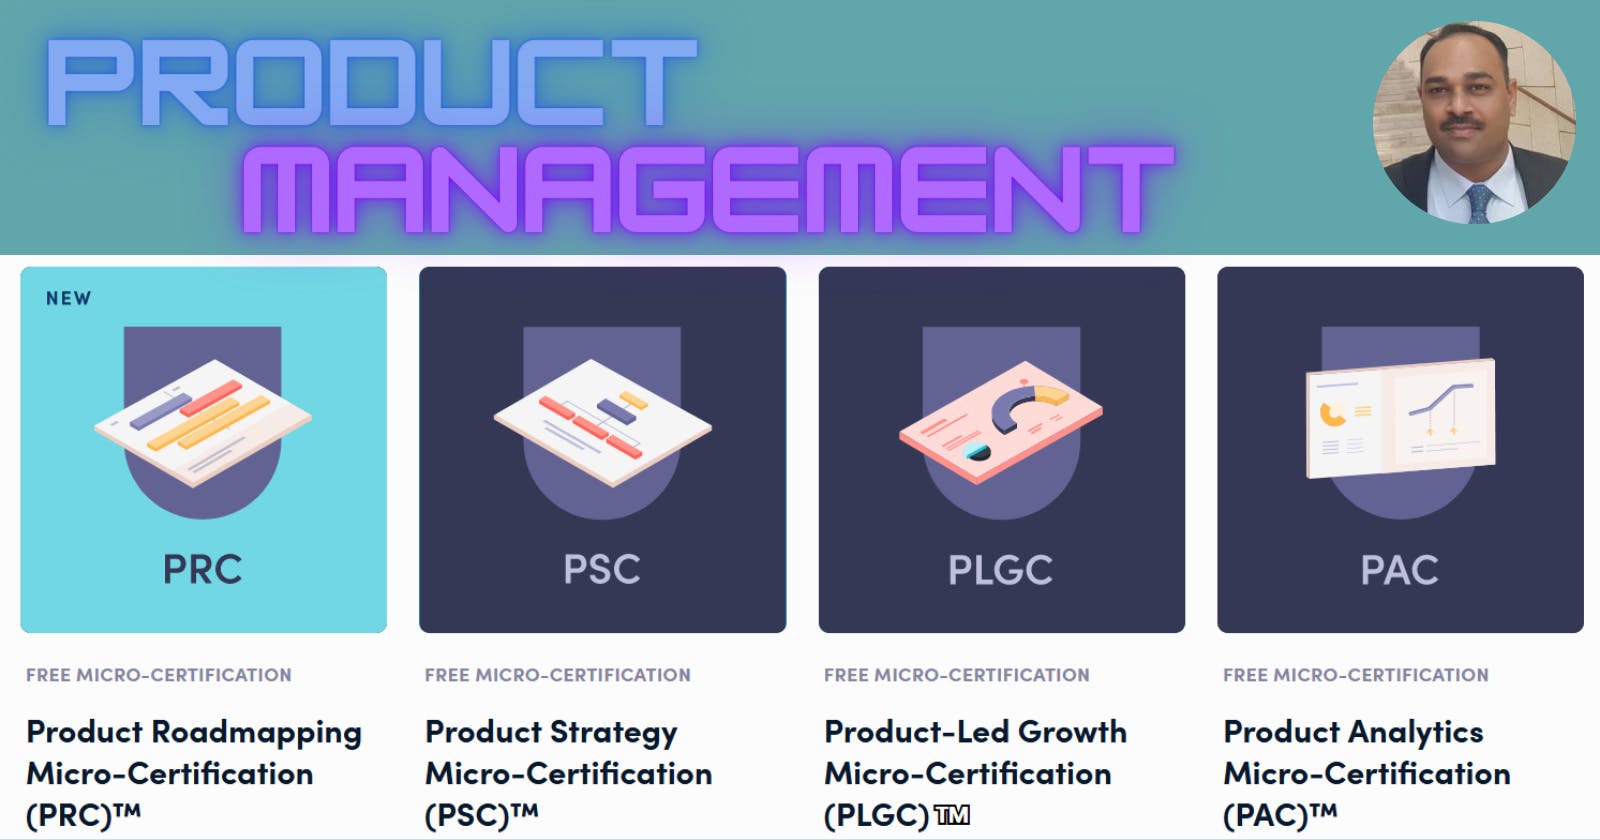 Free Micro Certifications for budding Product Managers